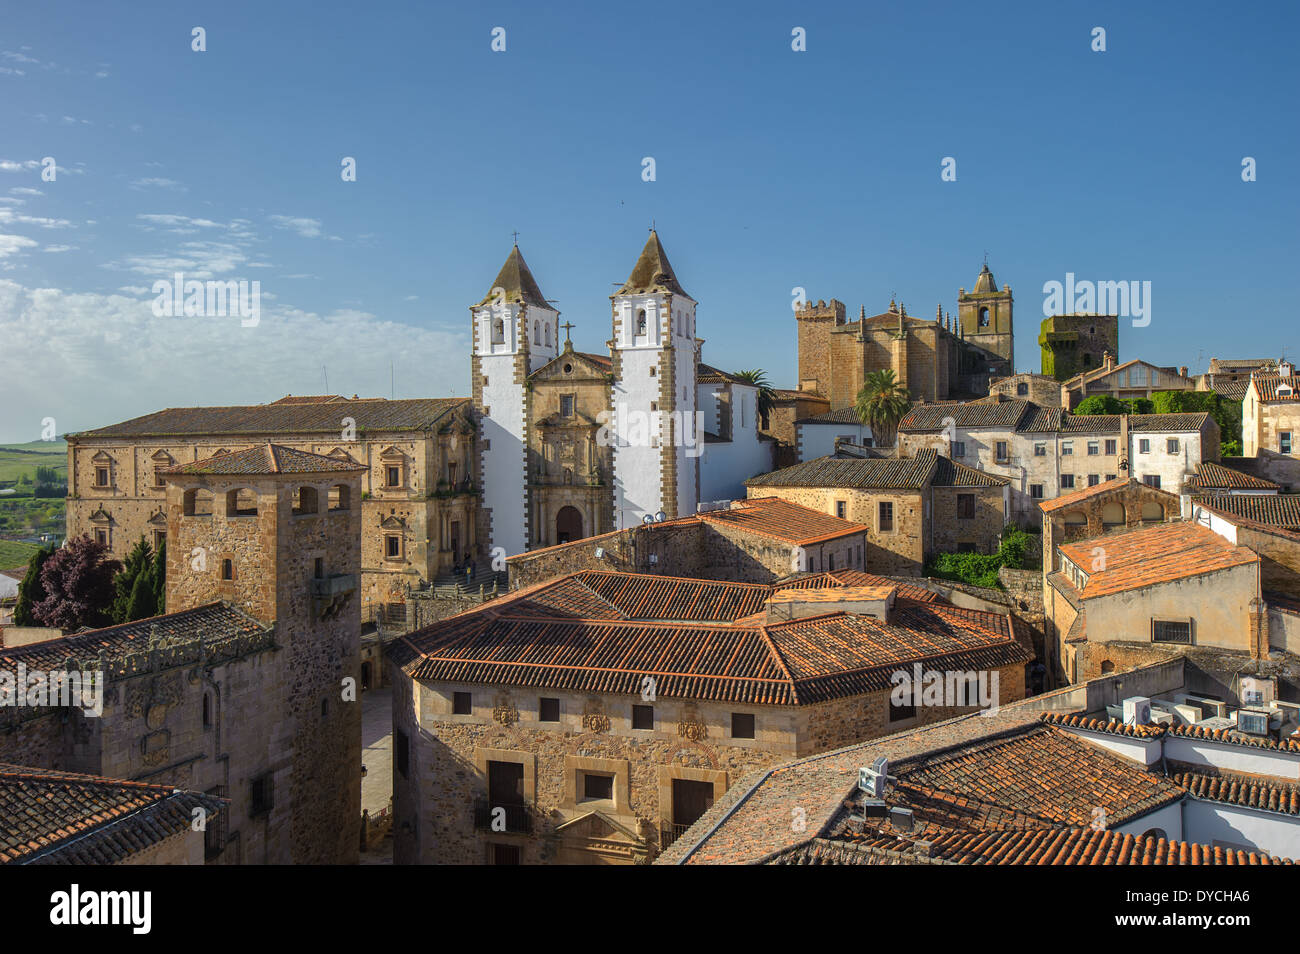 Old town of Caceras, Spain Stock Photo